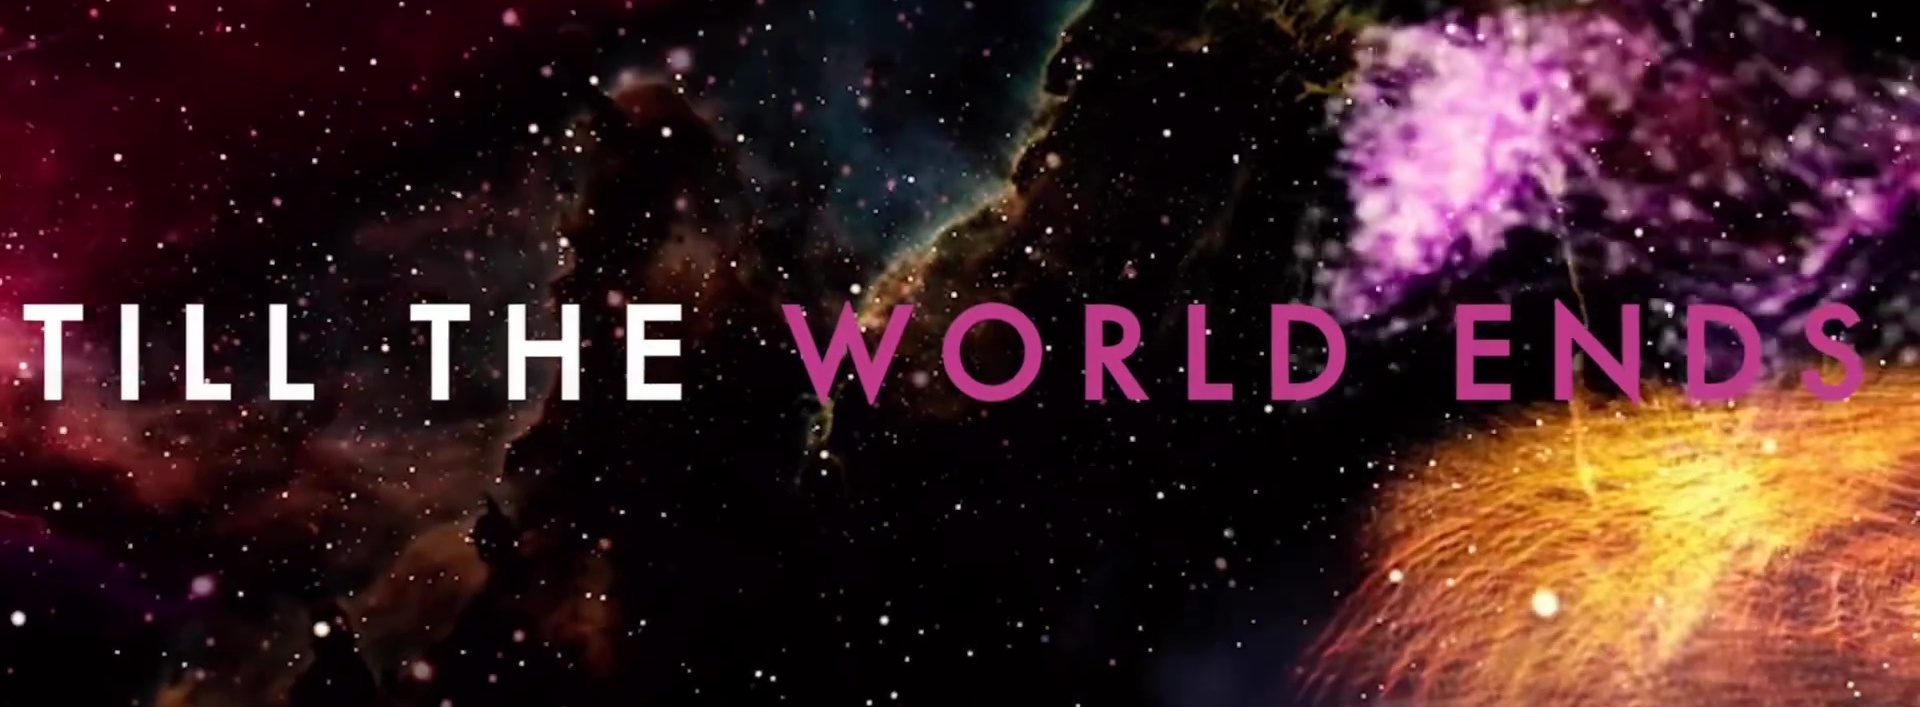 Till the World Ends Episode 6: Release Date
Credit to: Amarin TV Channel 34